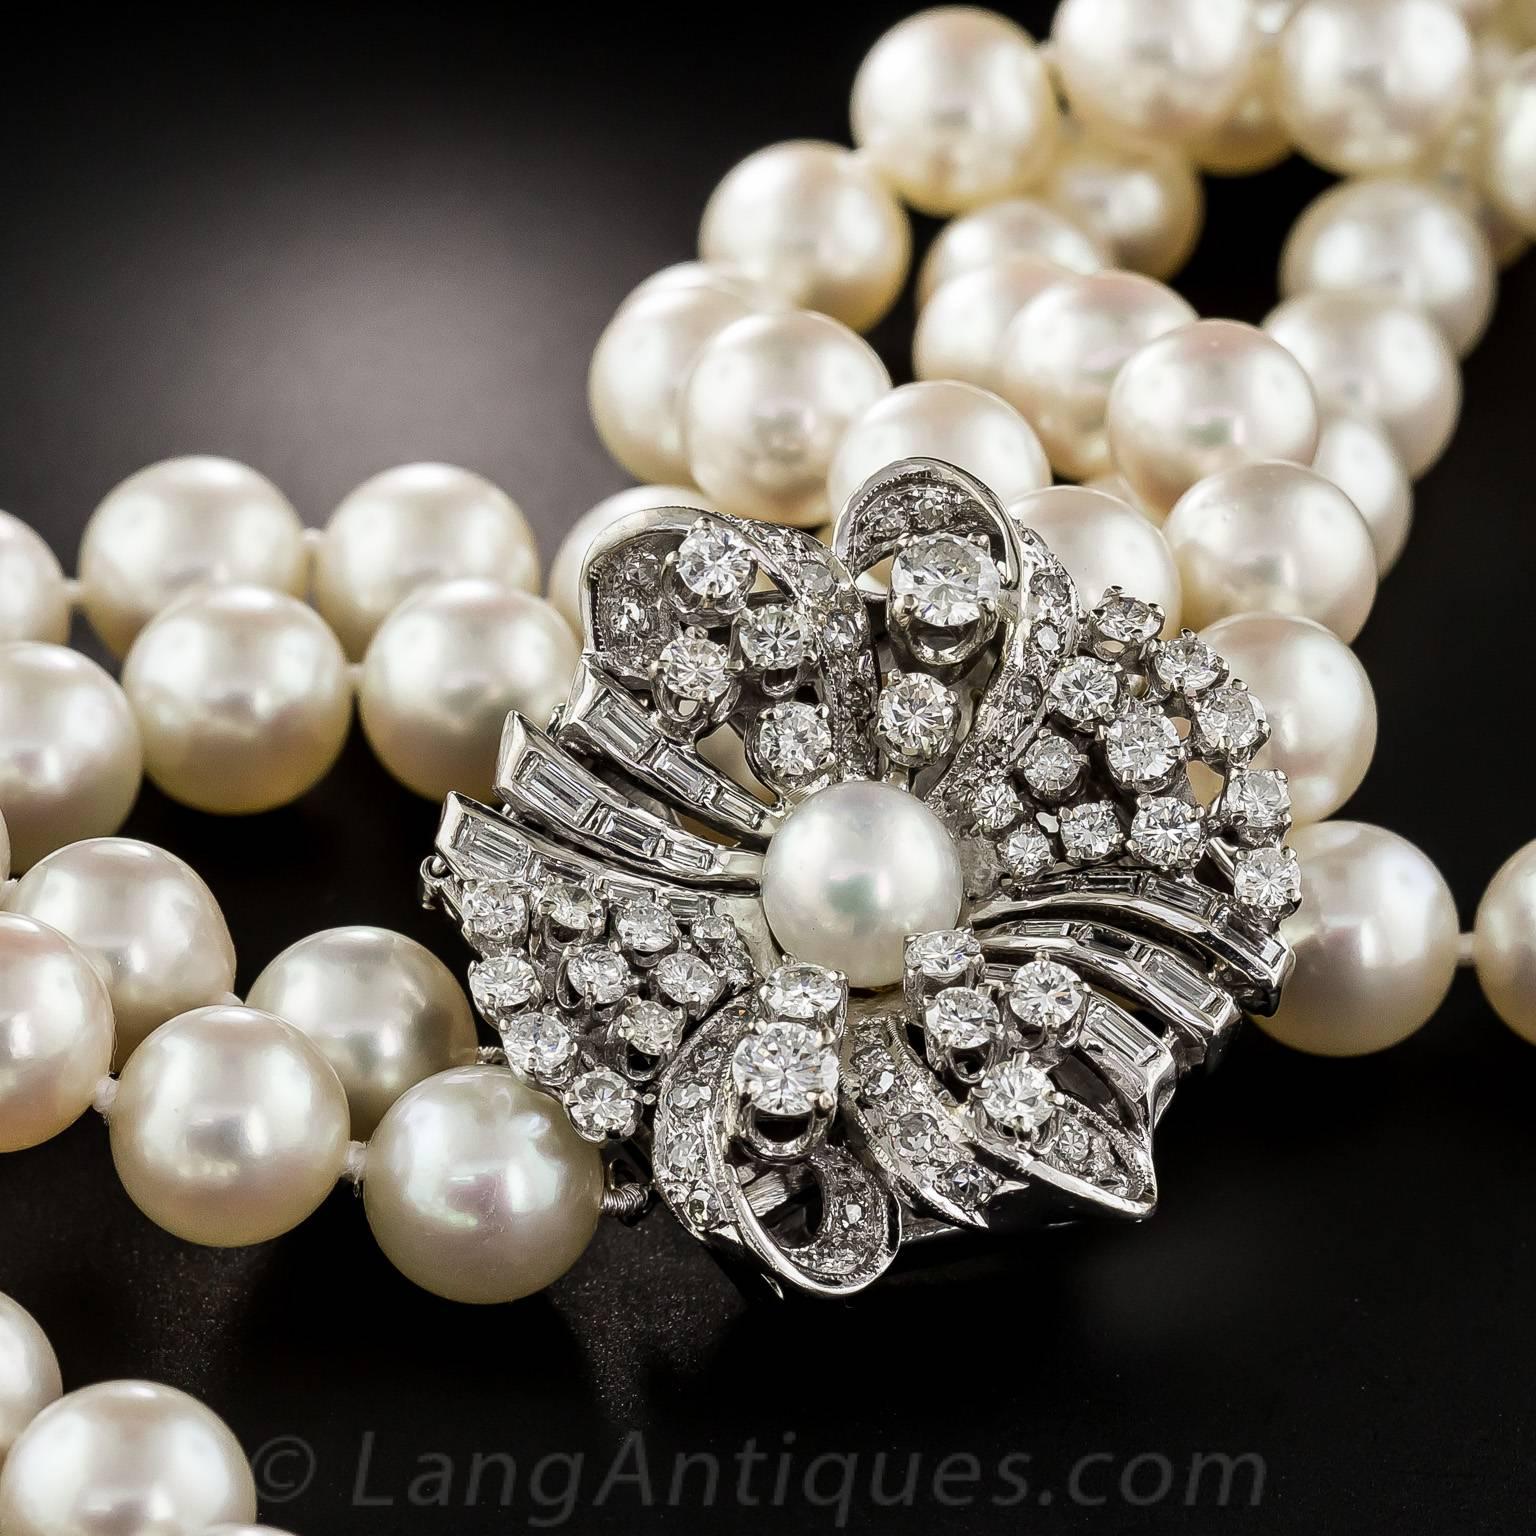 Lustrous double strands of 9.5 - 9.0 millimeter white, creamy, dreamy cultured pearls culminate in a scintillating constellation of bright white and brilliant round and baguette diamonds in this elegant, ultra-sparkling showstopper, evocative of